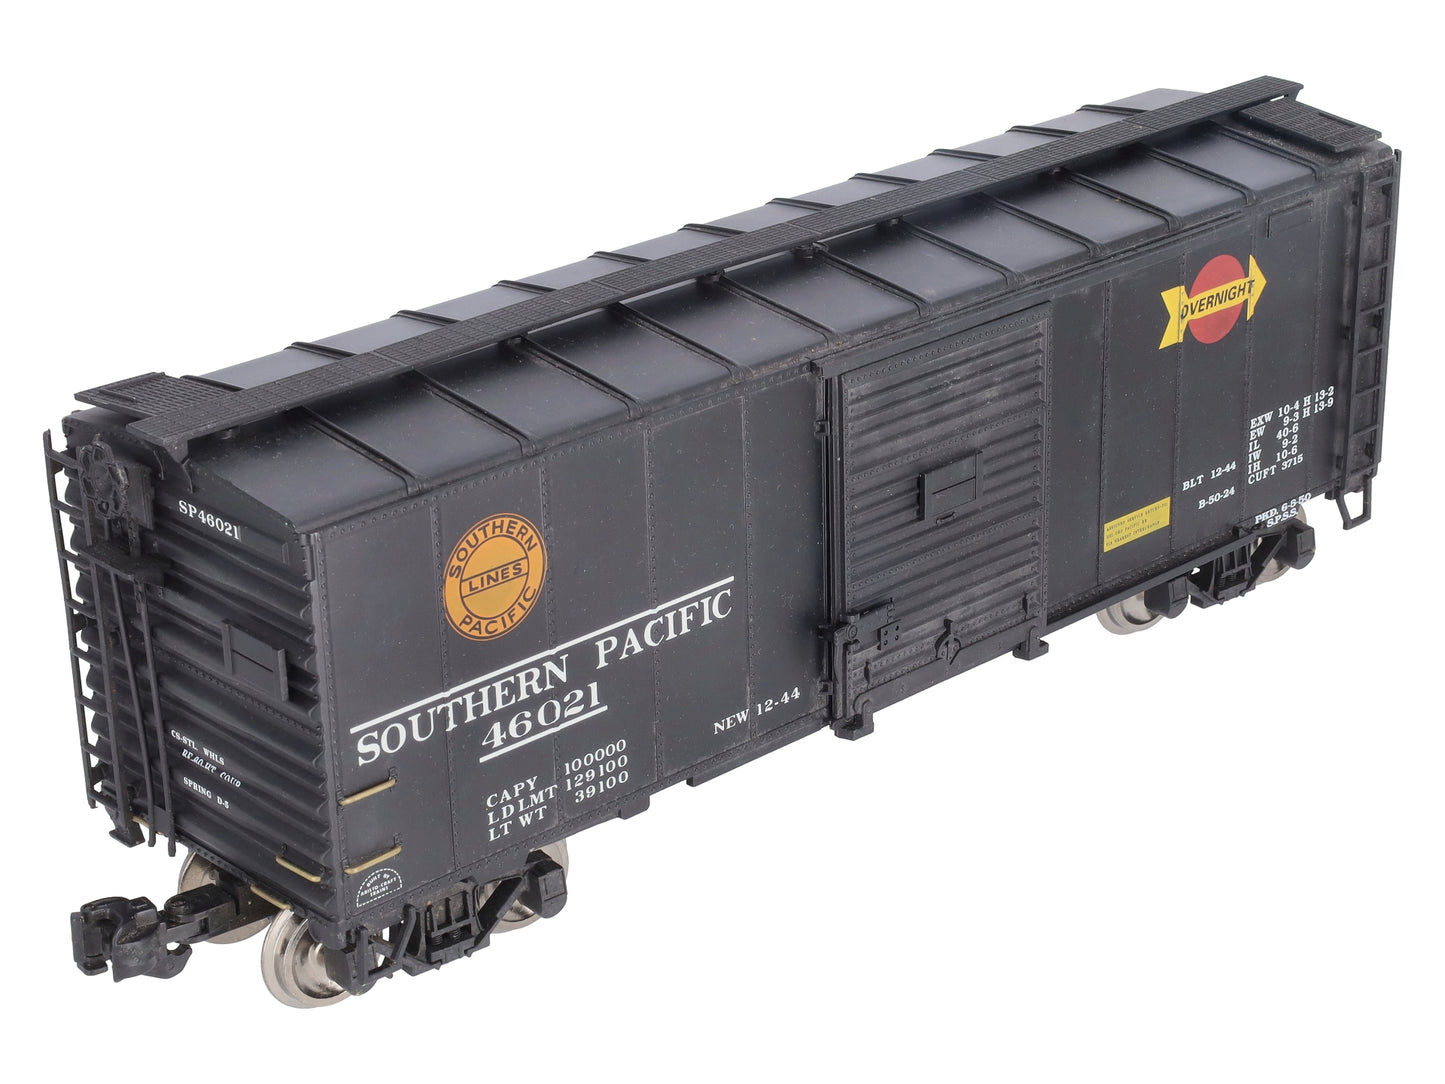 Aristo-Craft 46021 G Scale Southern Pacific Boxcar (Metal Wheels) EX